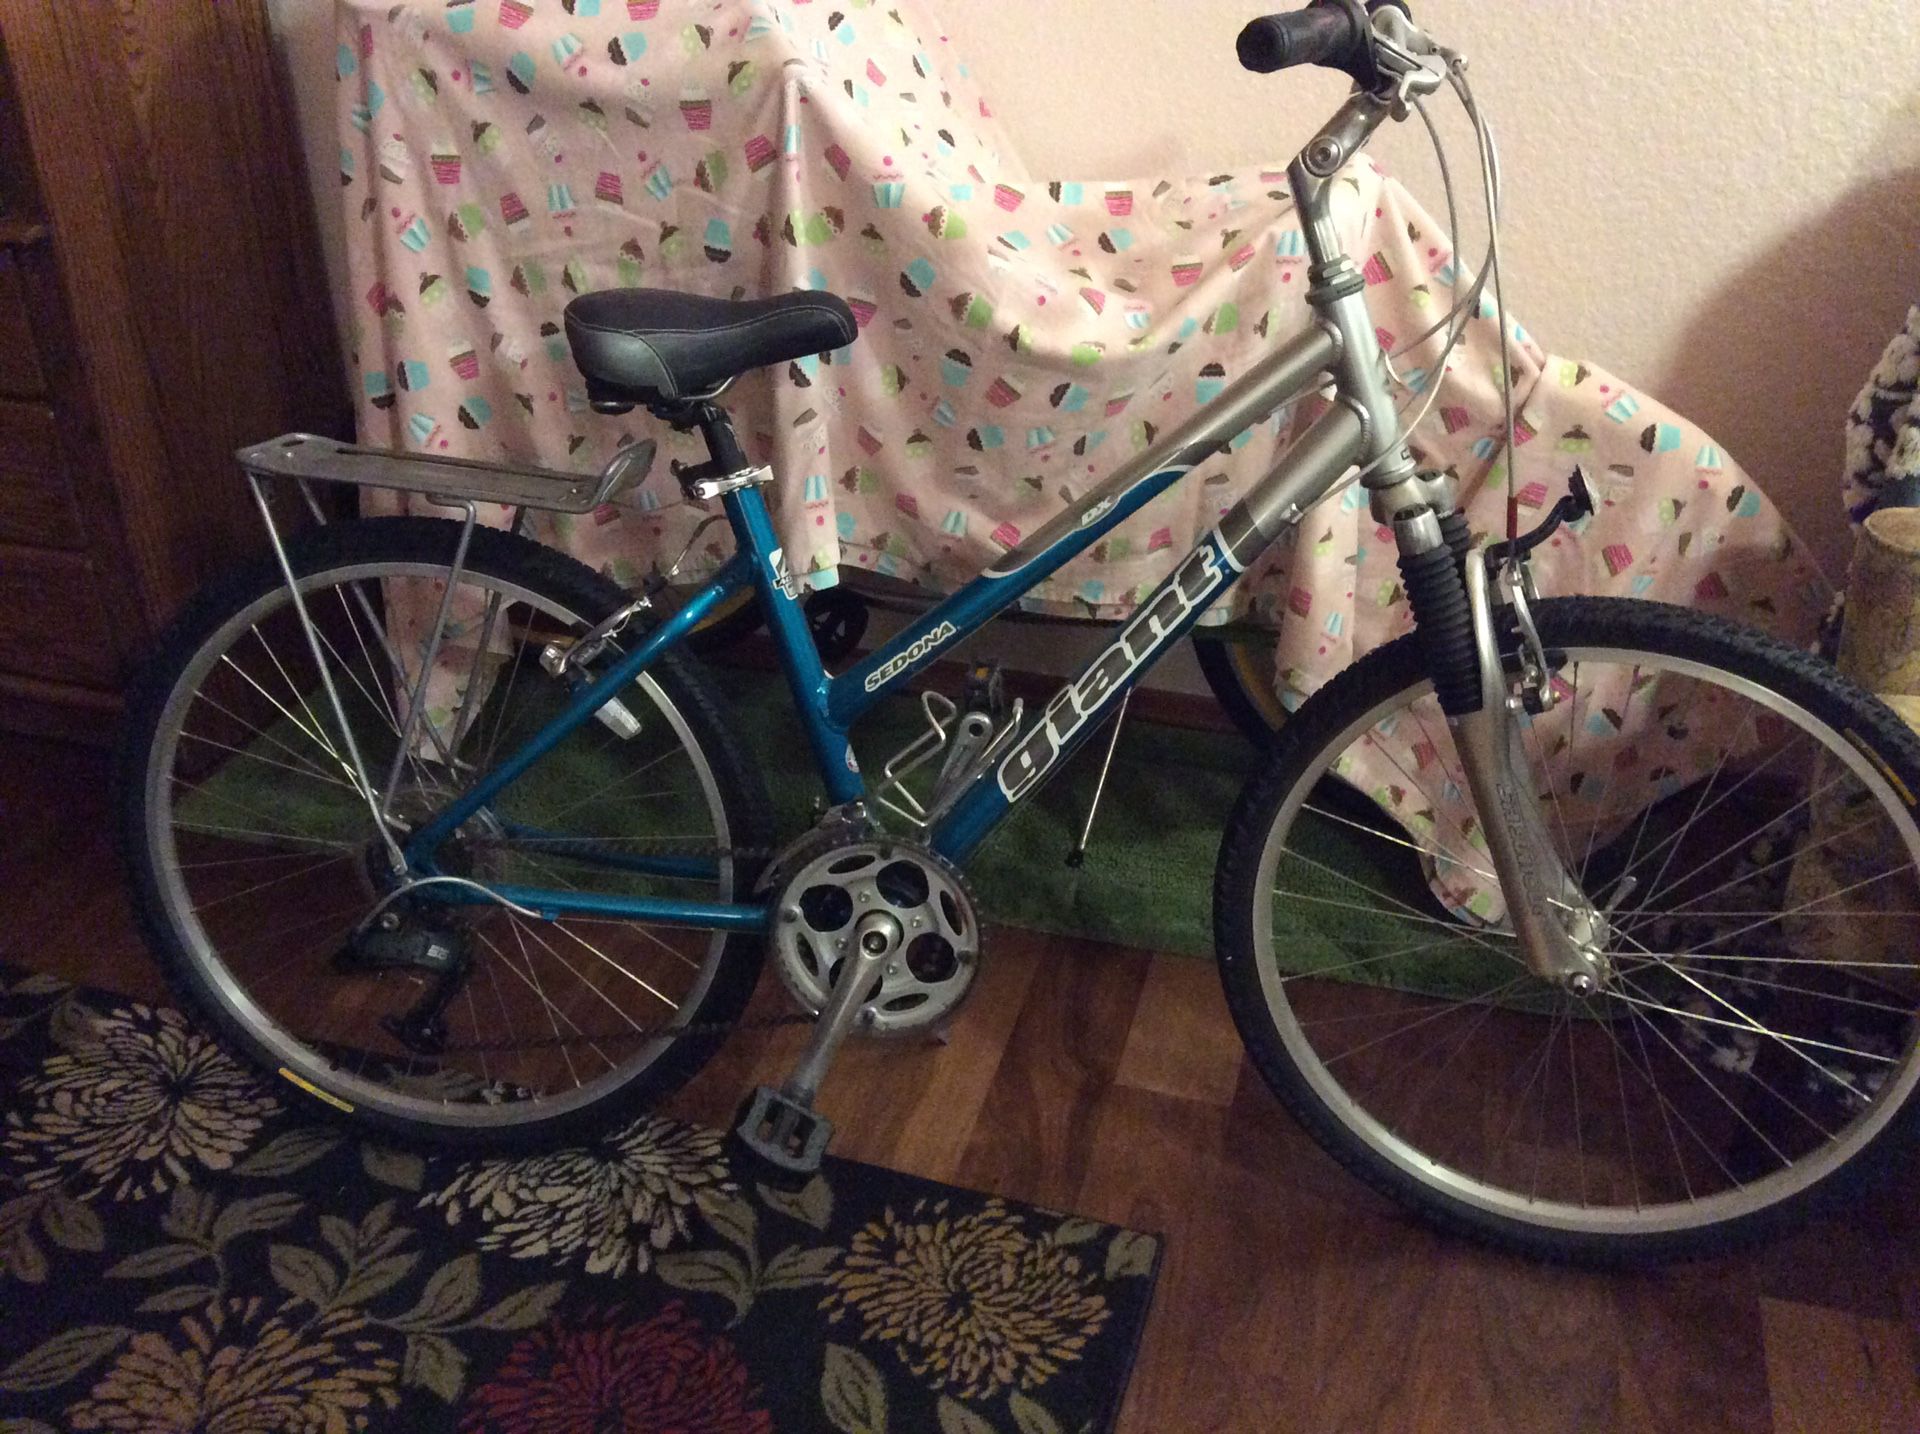 Woman’s beautiful teal and silver Giant Sedona bike. A rack over the back tire for carrying items.....water bottle rack fits most containers. Tires